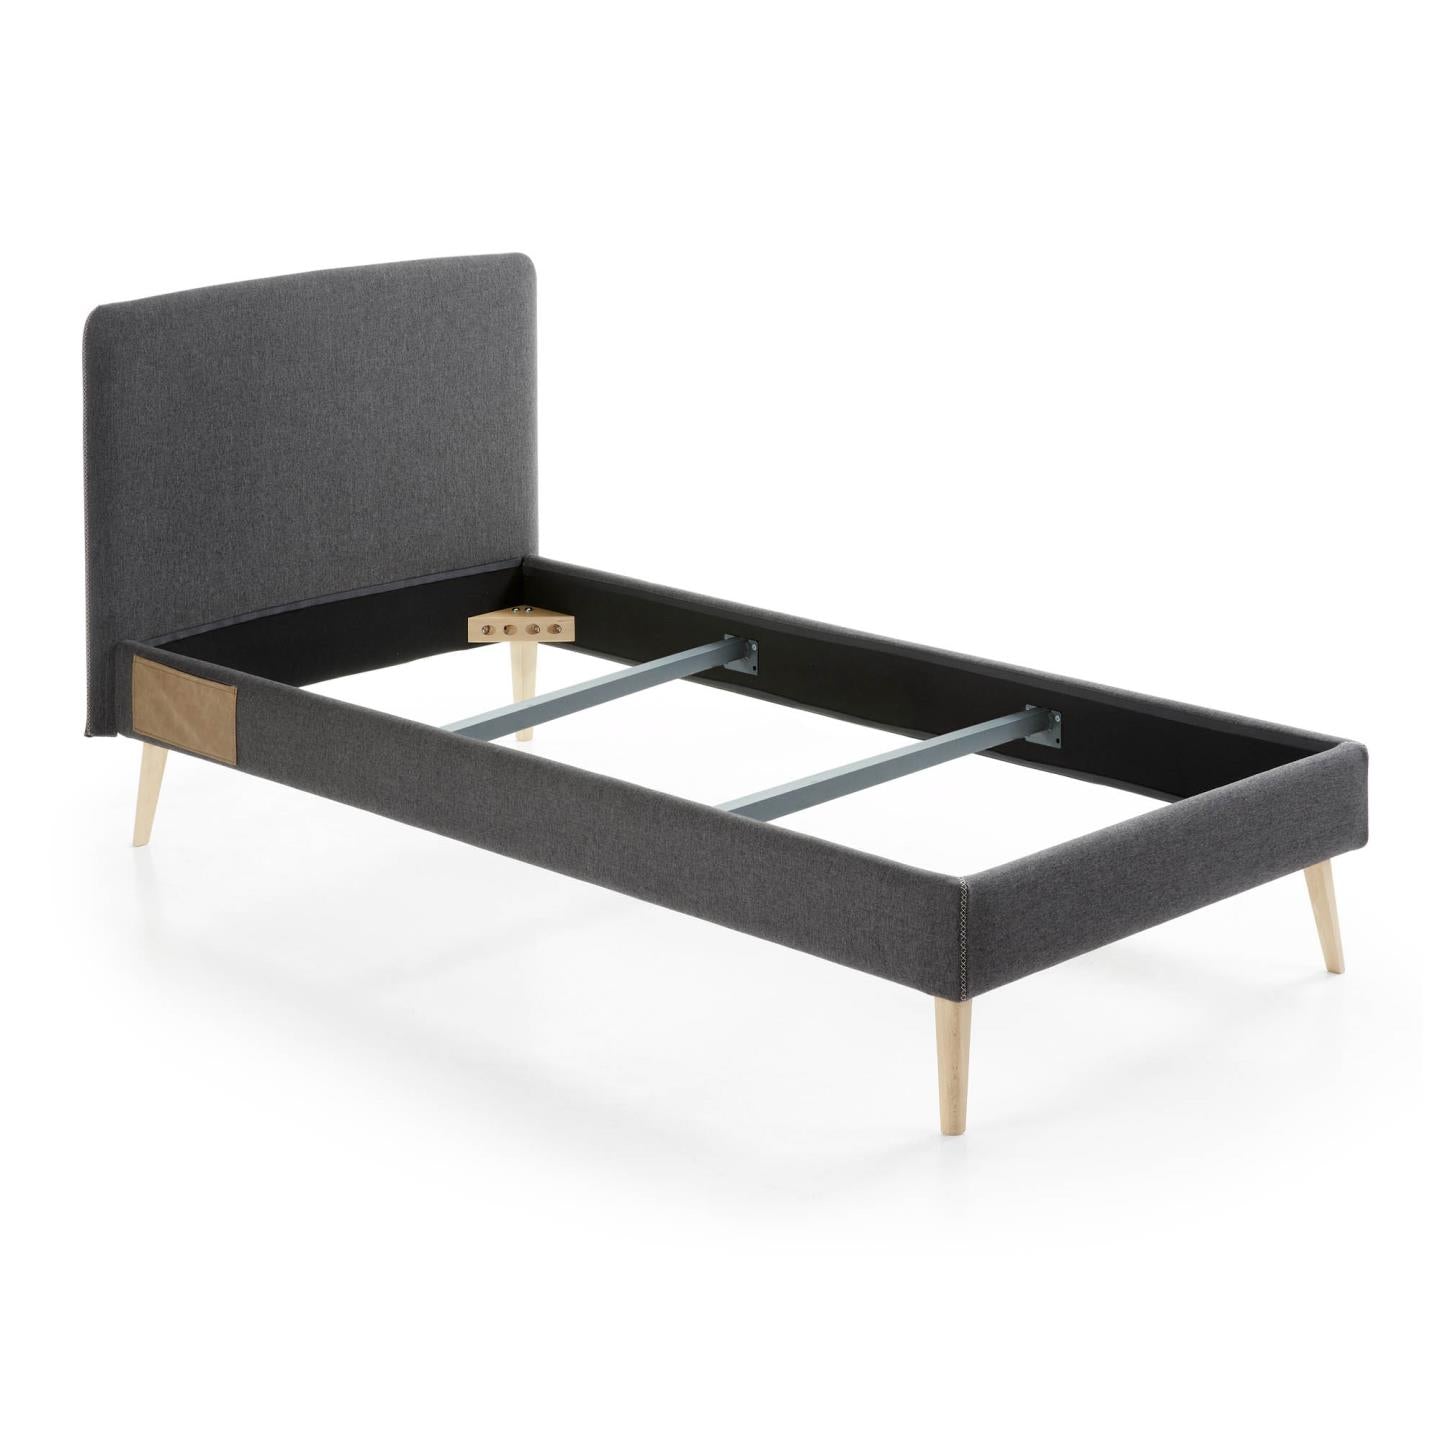 Dyla bed with removable cover in black white solid beech wood legs, for a 90 x 190 cm mattress